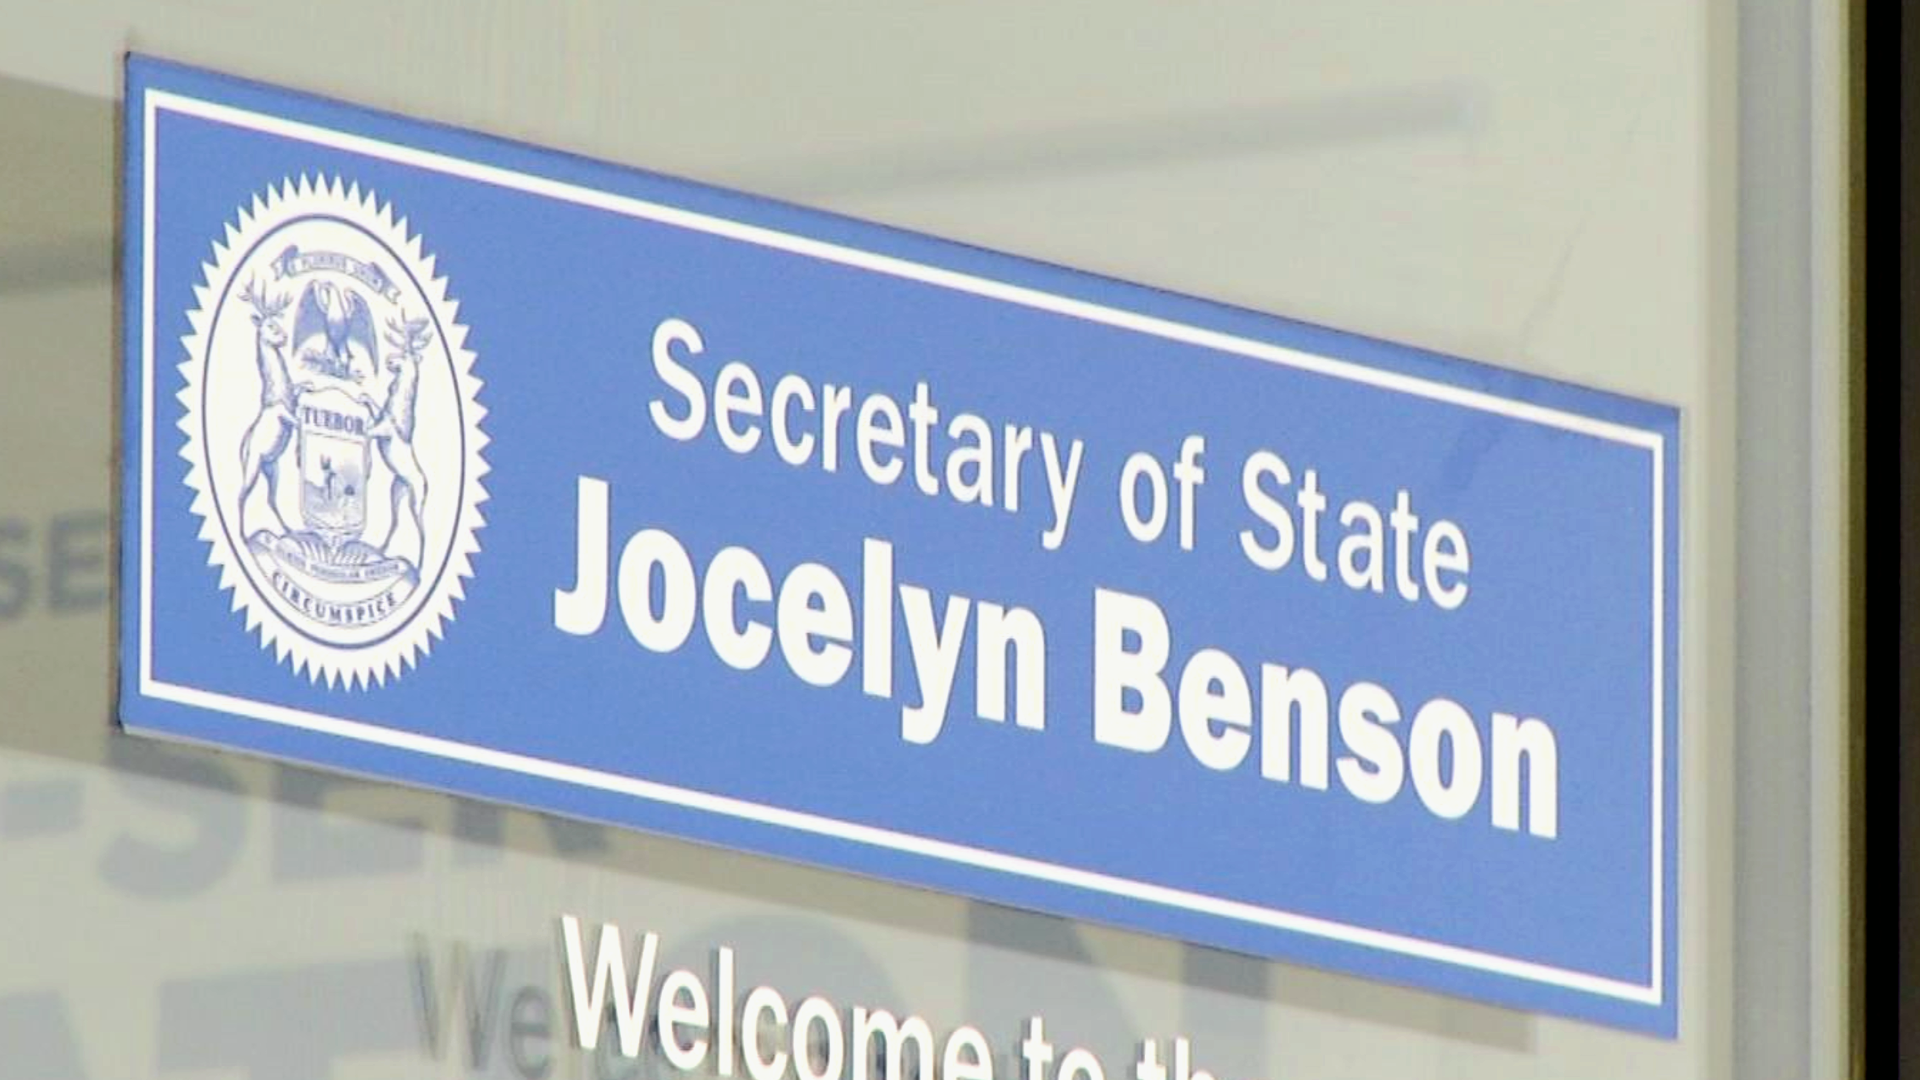 Secretary of State Mobile Office, 6th in the state, opens in Northern Michigan